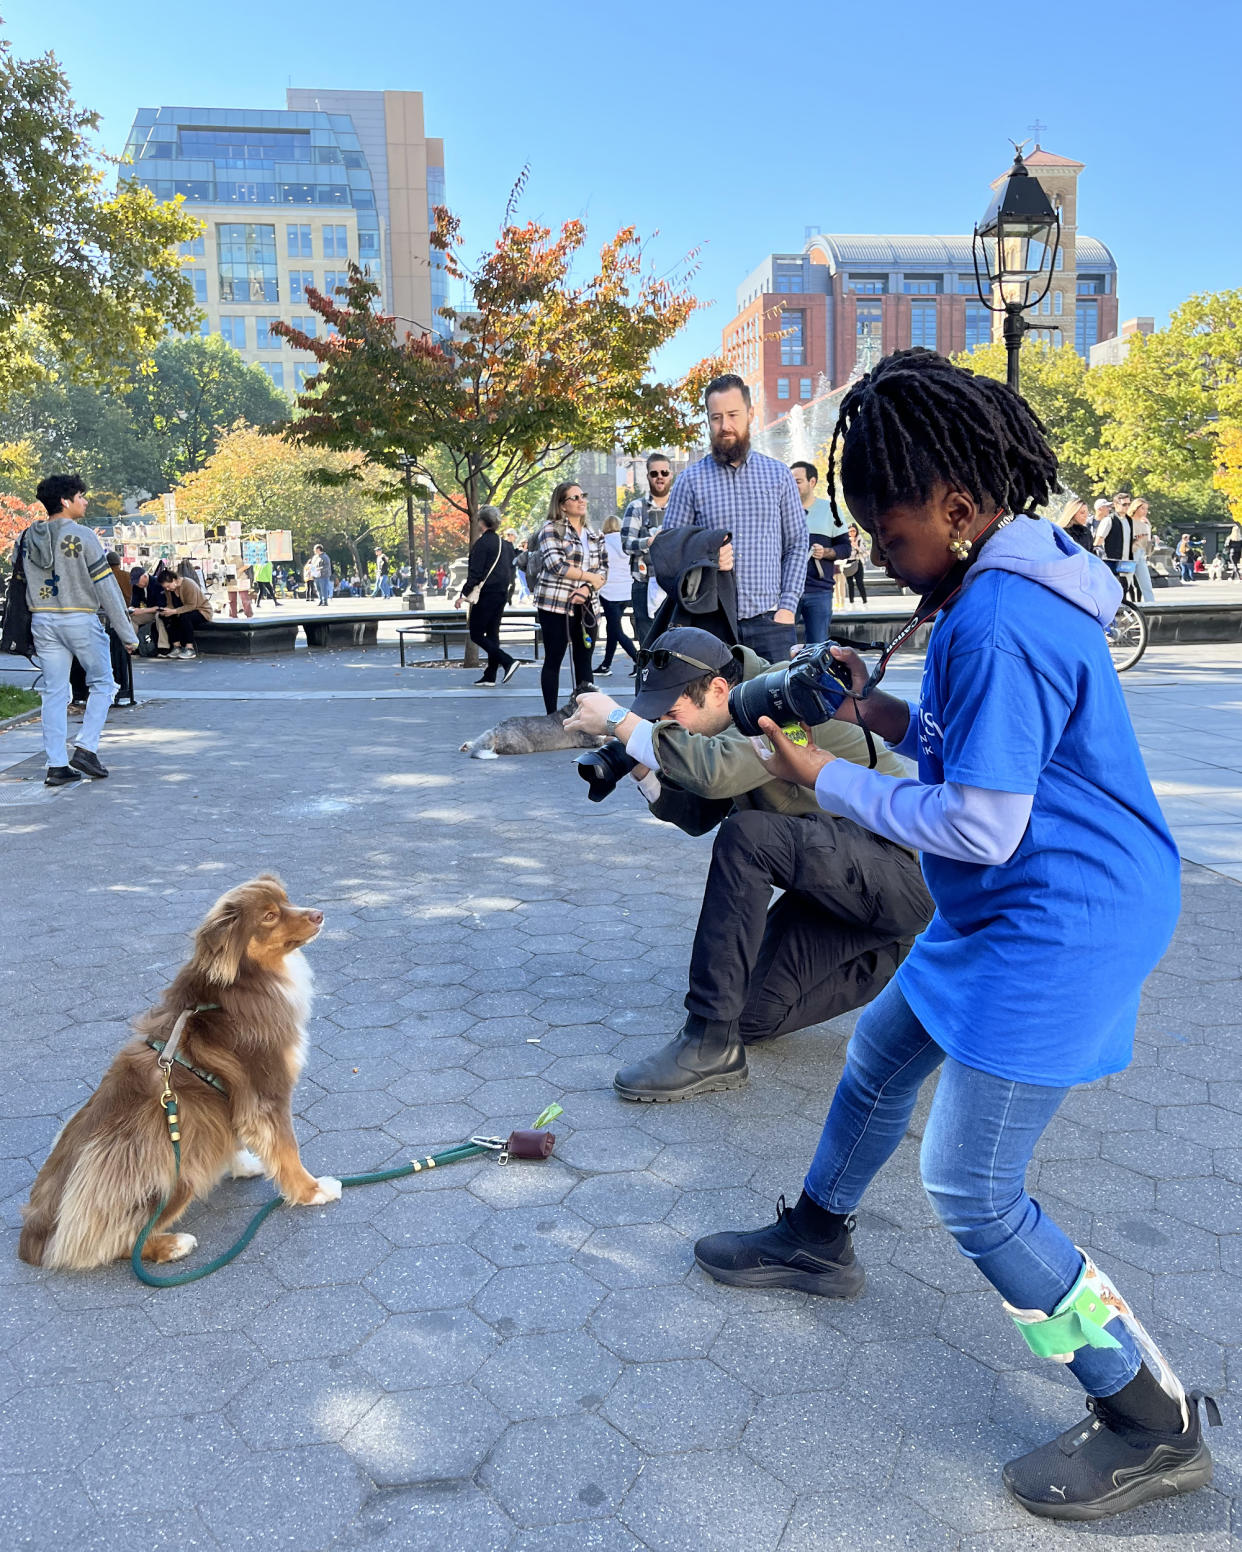 Elias Weiss Friedman, aka The Dogist, said Zoey Henry is a natural when it comes to photographing dogs. Here they are with Roo. (Courtesy Make-A-Wish)